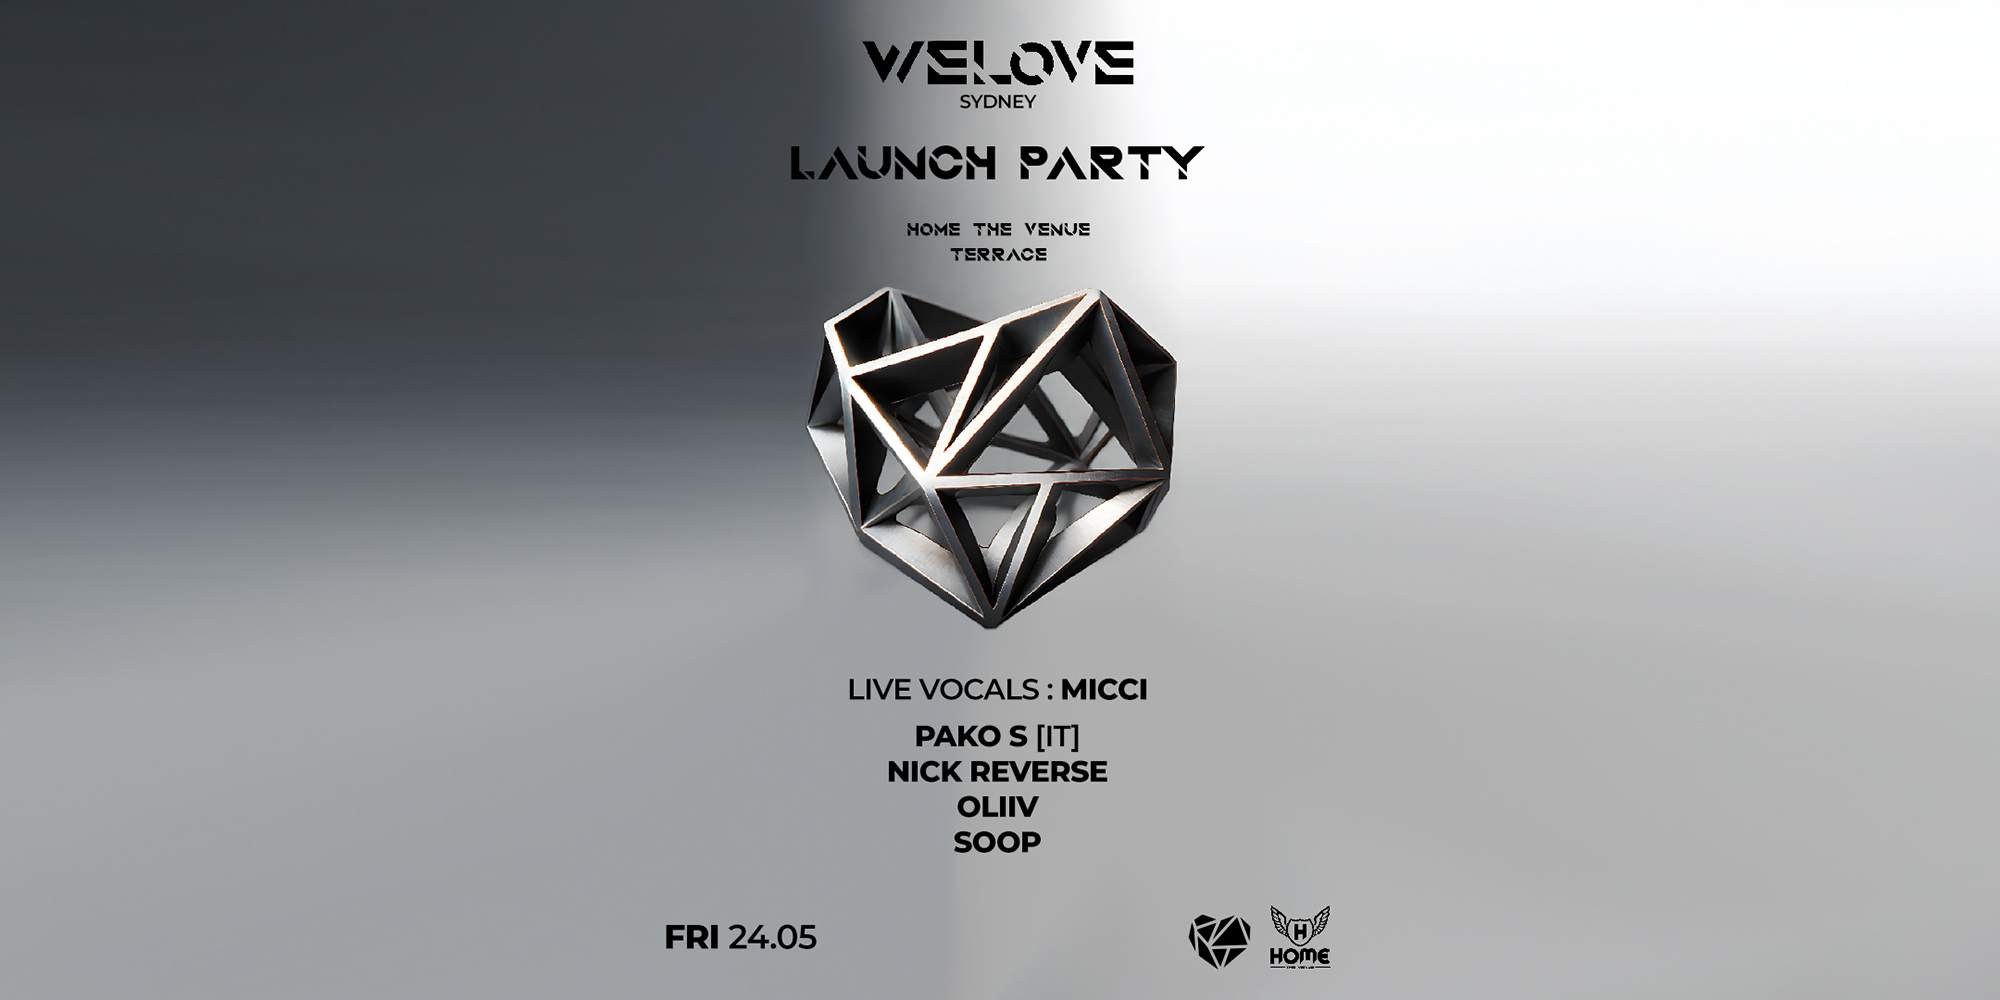 WeLove Sydney Launch Party - Home The Venue - フライヤー表